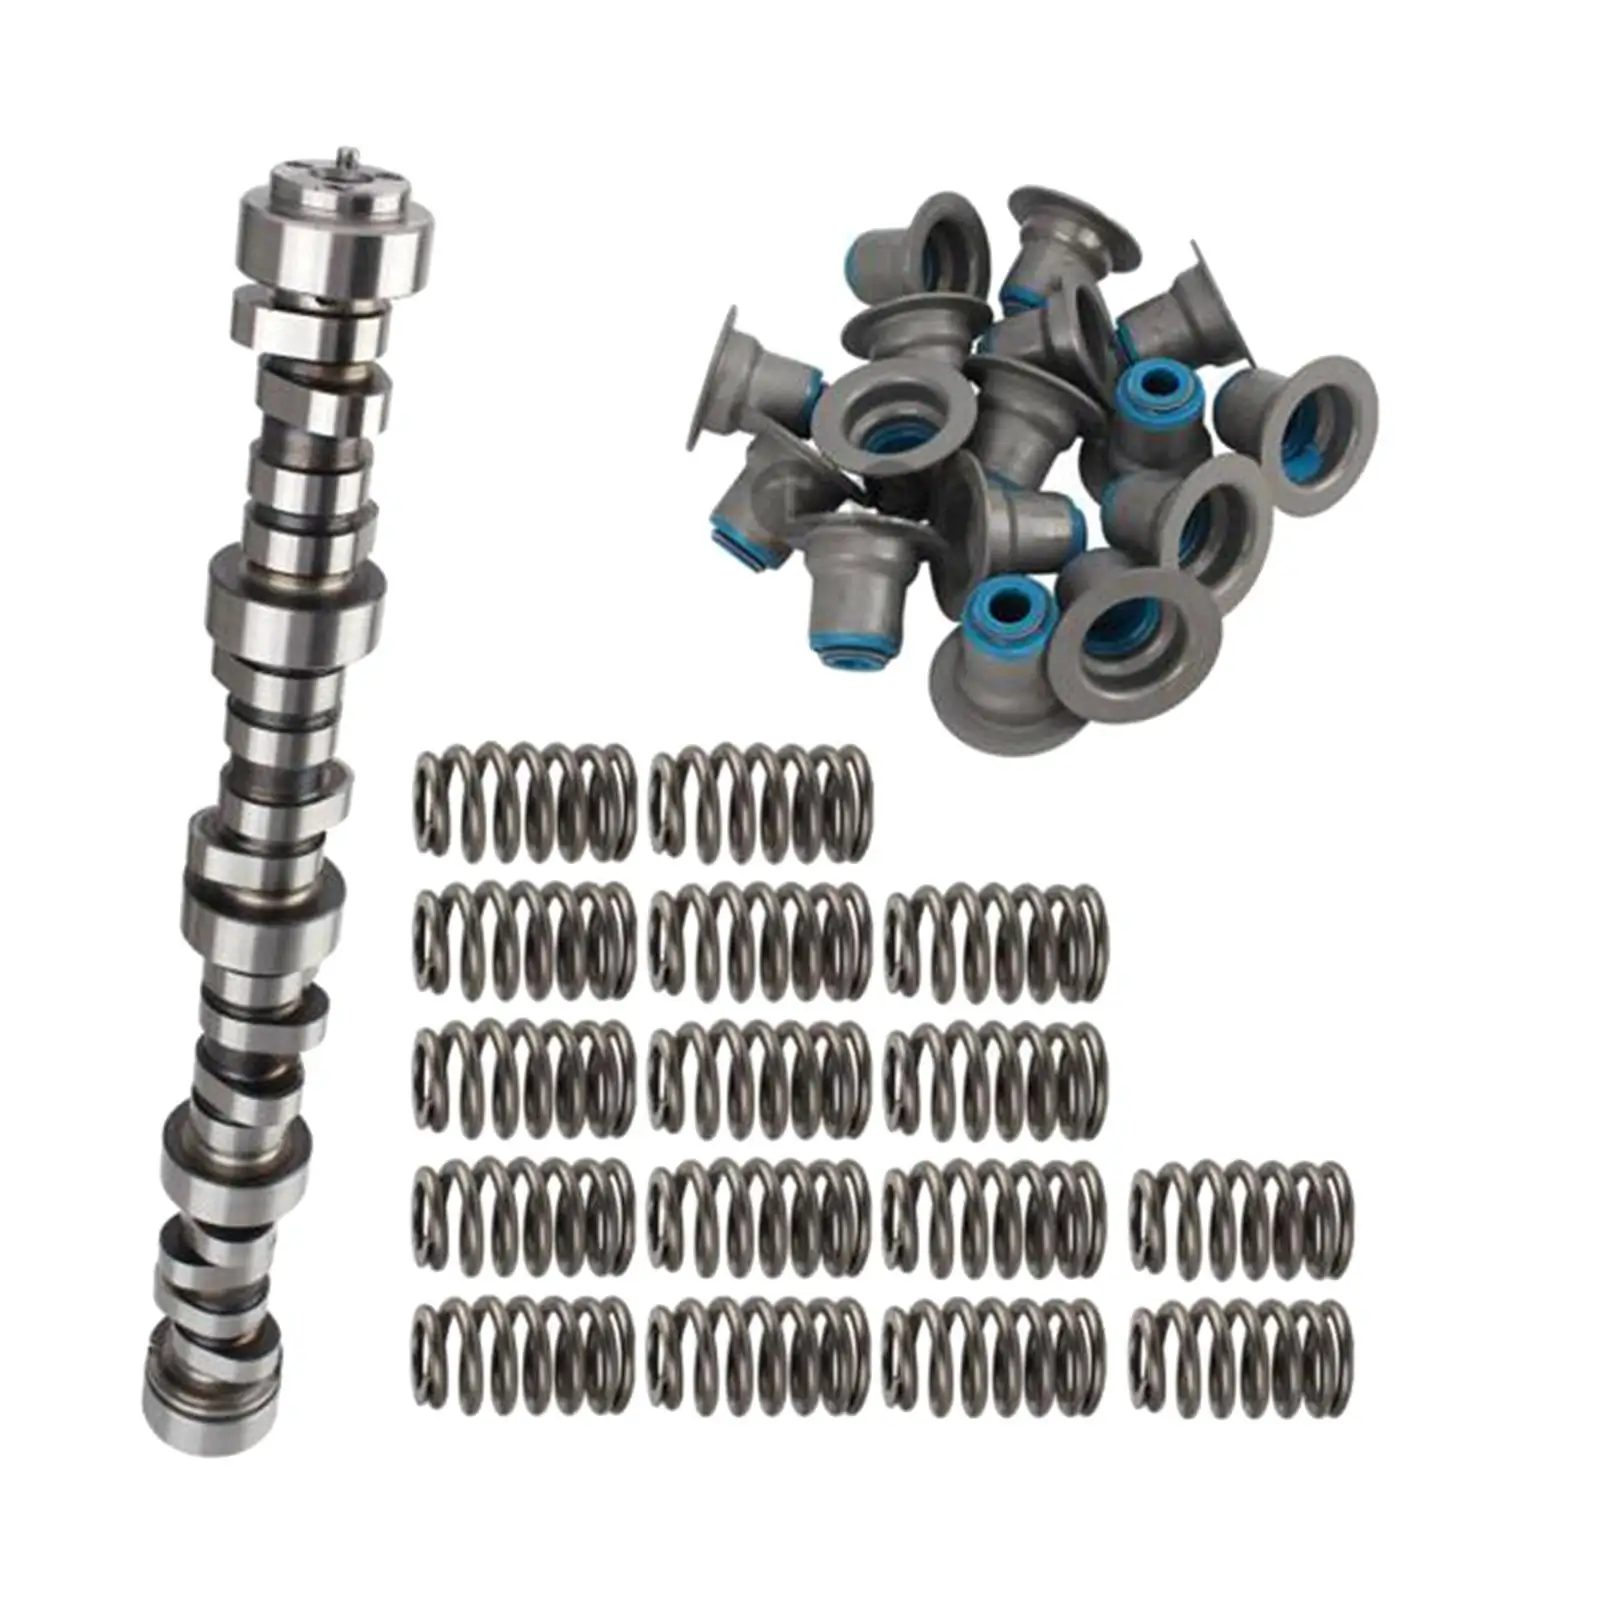 cam Kit 31218132 Accessories High Performance Metal Directly Replace for Sierra Stage 2 V2 LS Truck 4.8L 5.3L 6.0L 6.2L